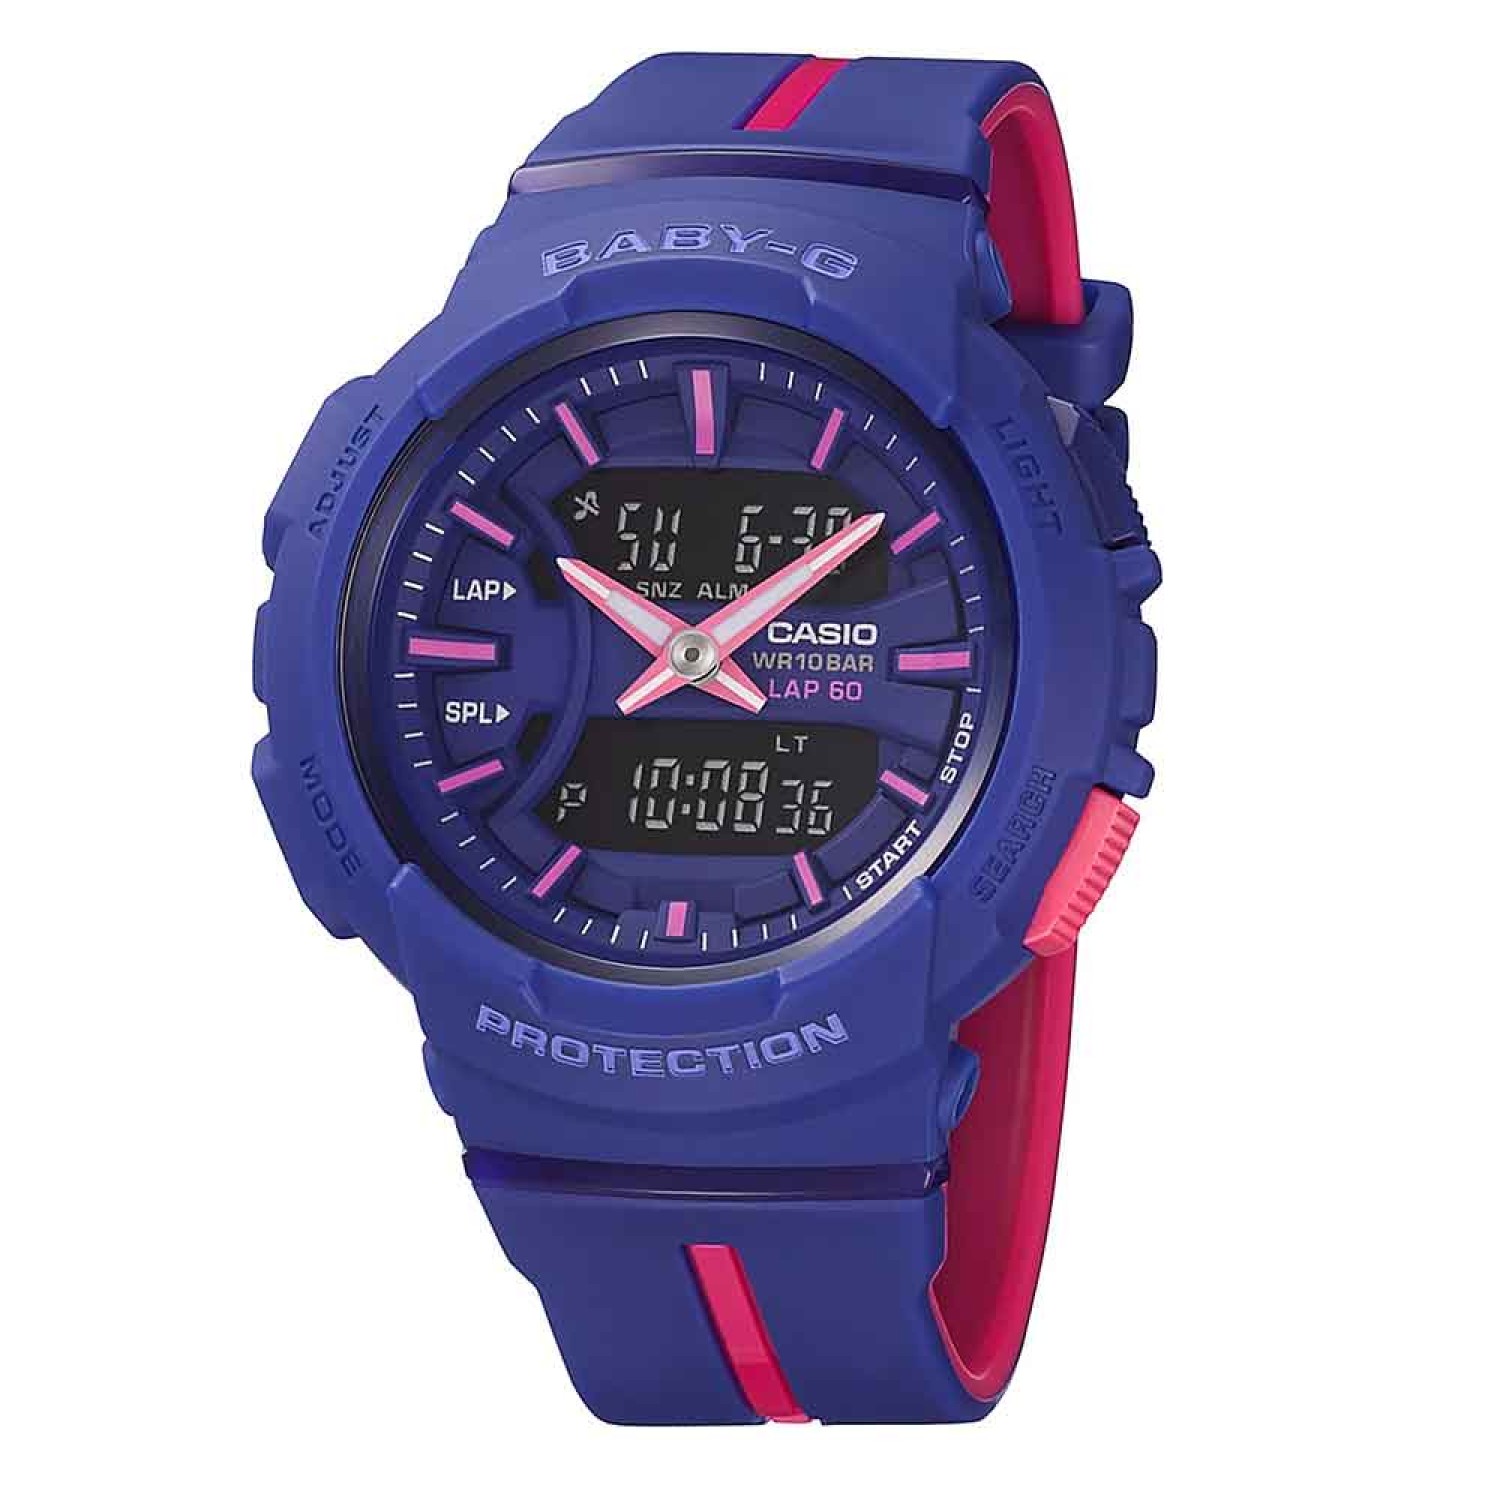 BGA240L-2A1 Casio Baby-G Runners Watch. The CASIO BGA240L-2A1 BABY-G is a watch that accompanies you wherever you go. It fits every aspect of your active life — it is sporty, bold and colourful. The typical BABY-G design reflects loud colours a @christies